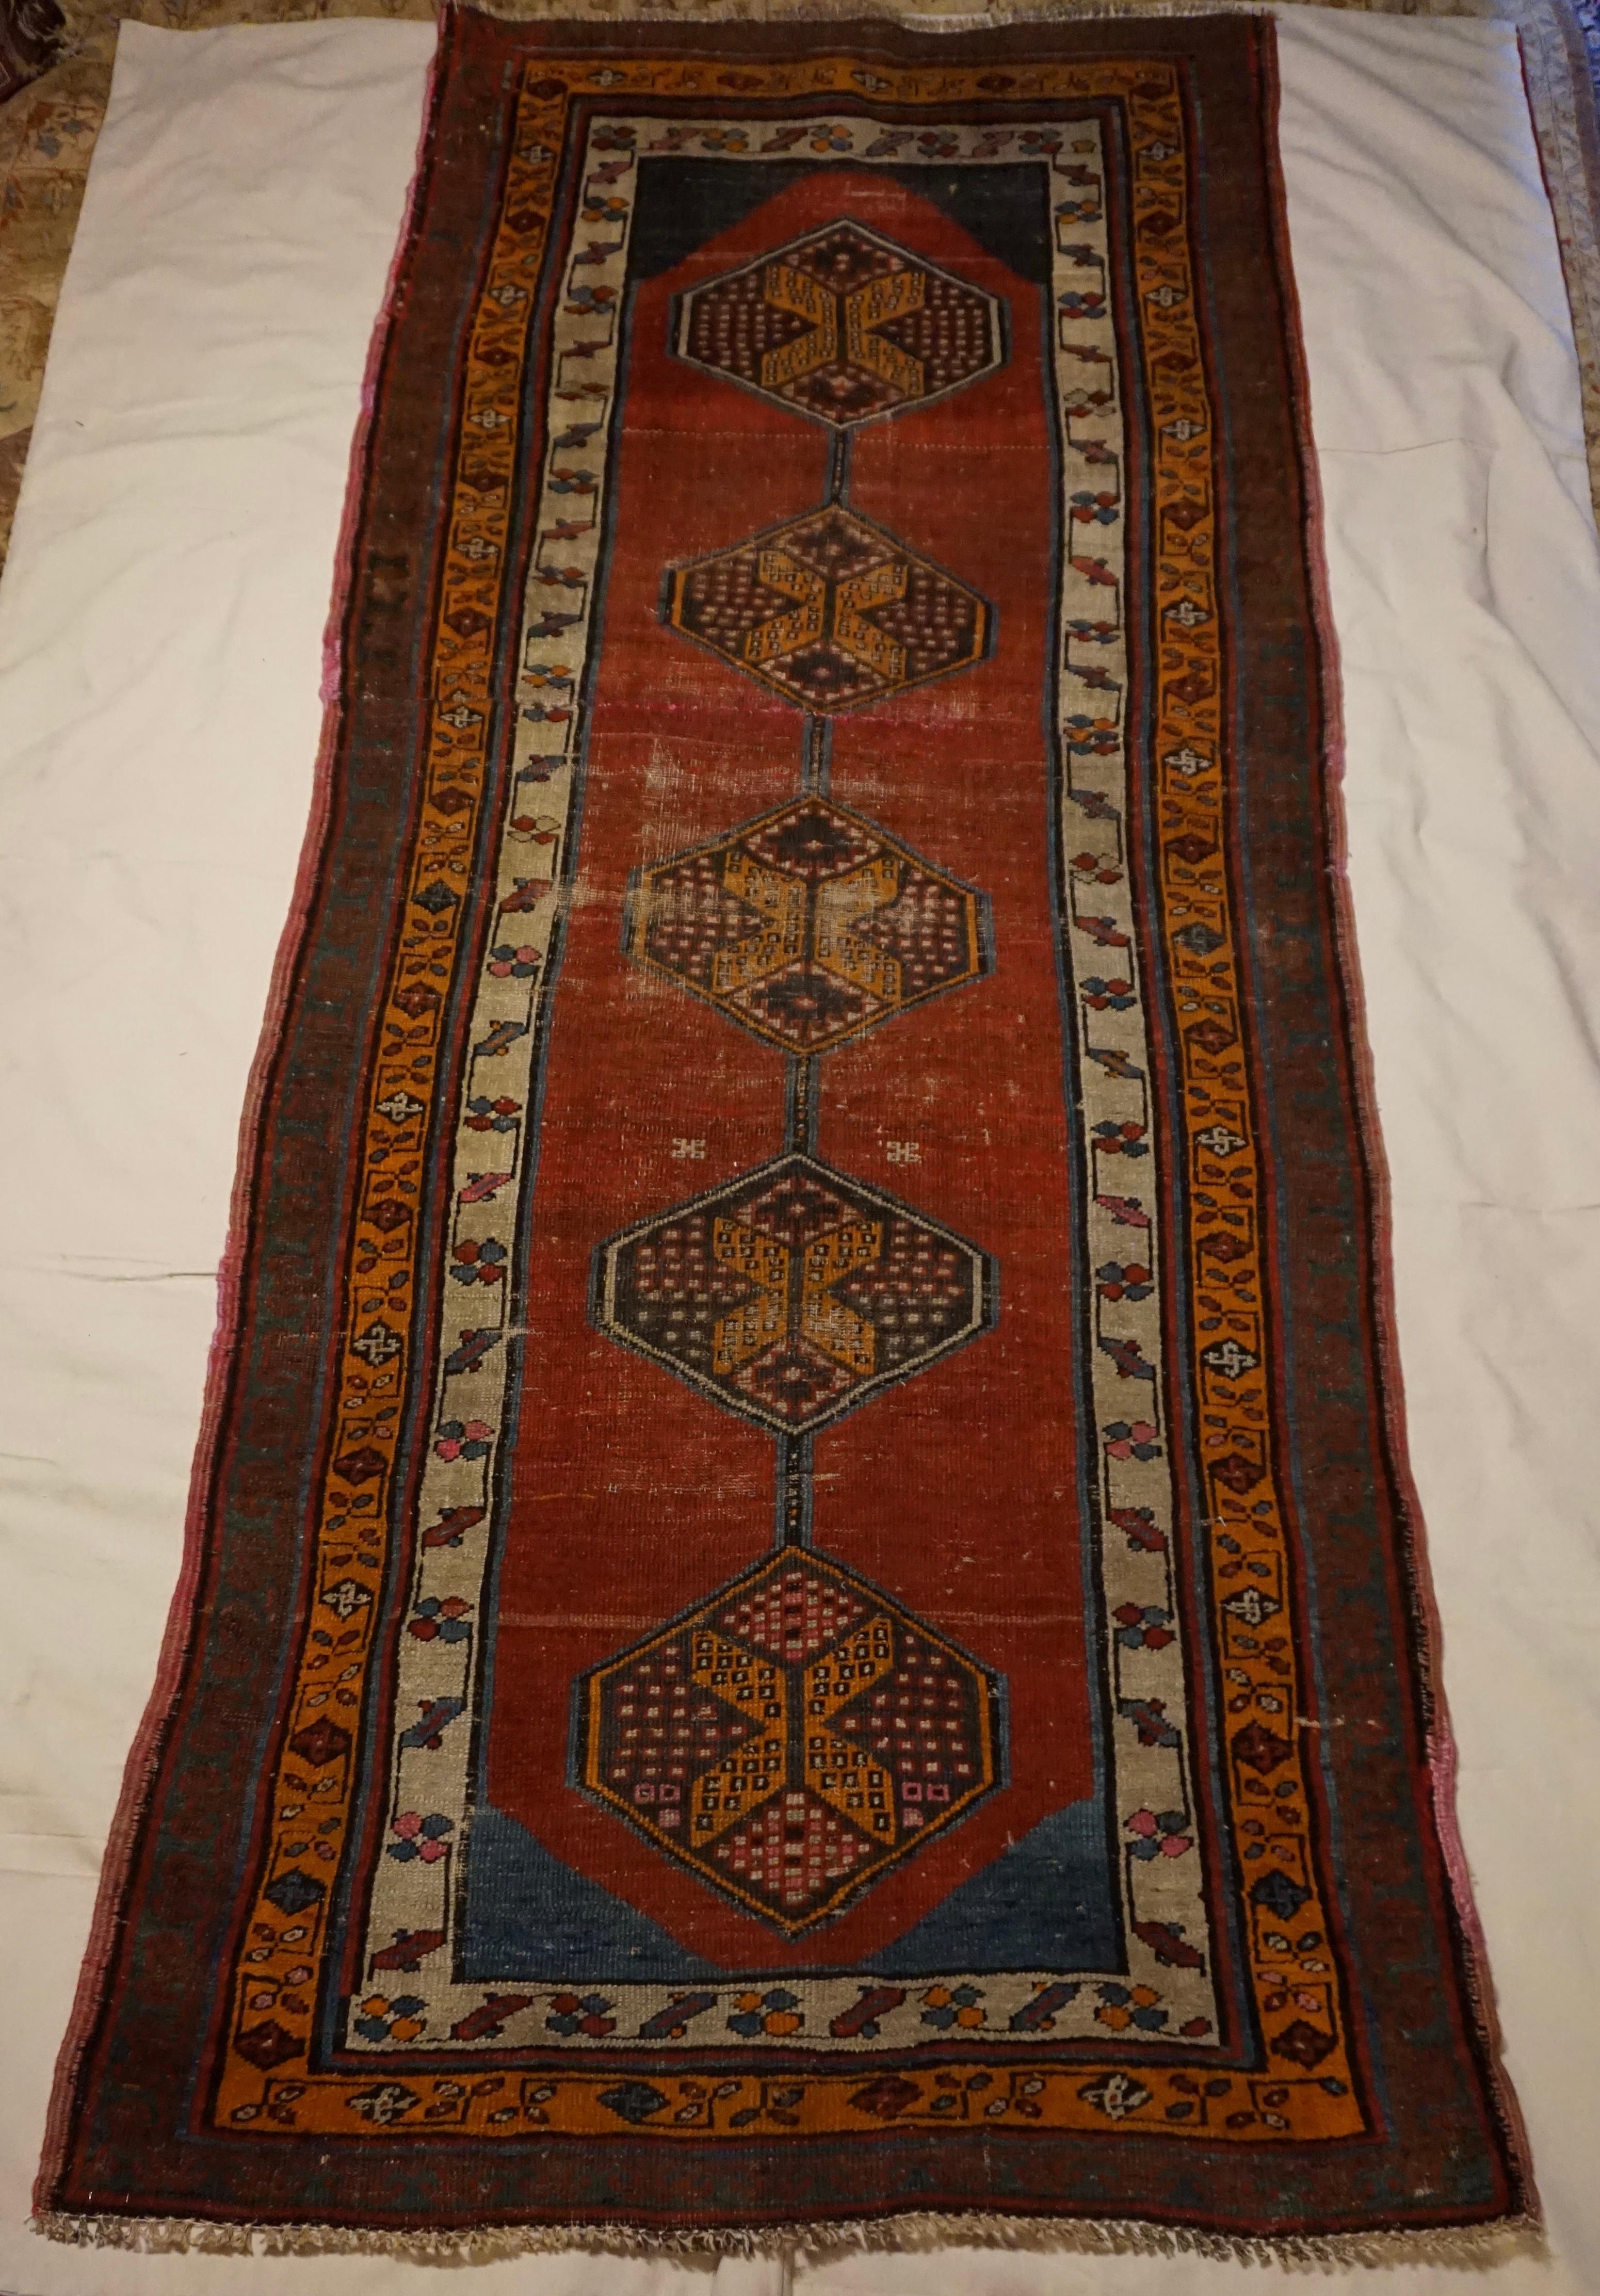 Beautiful late 19th Century Caucasus Tribal runner hand-knotted in natural dyed wool in pomegranate reds, ochre and turquoise. Bold pattern with a chain of kite shaped medallions encompassing honey comb designs. This rug has a few low pile spots and